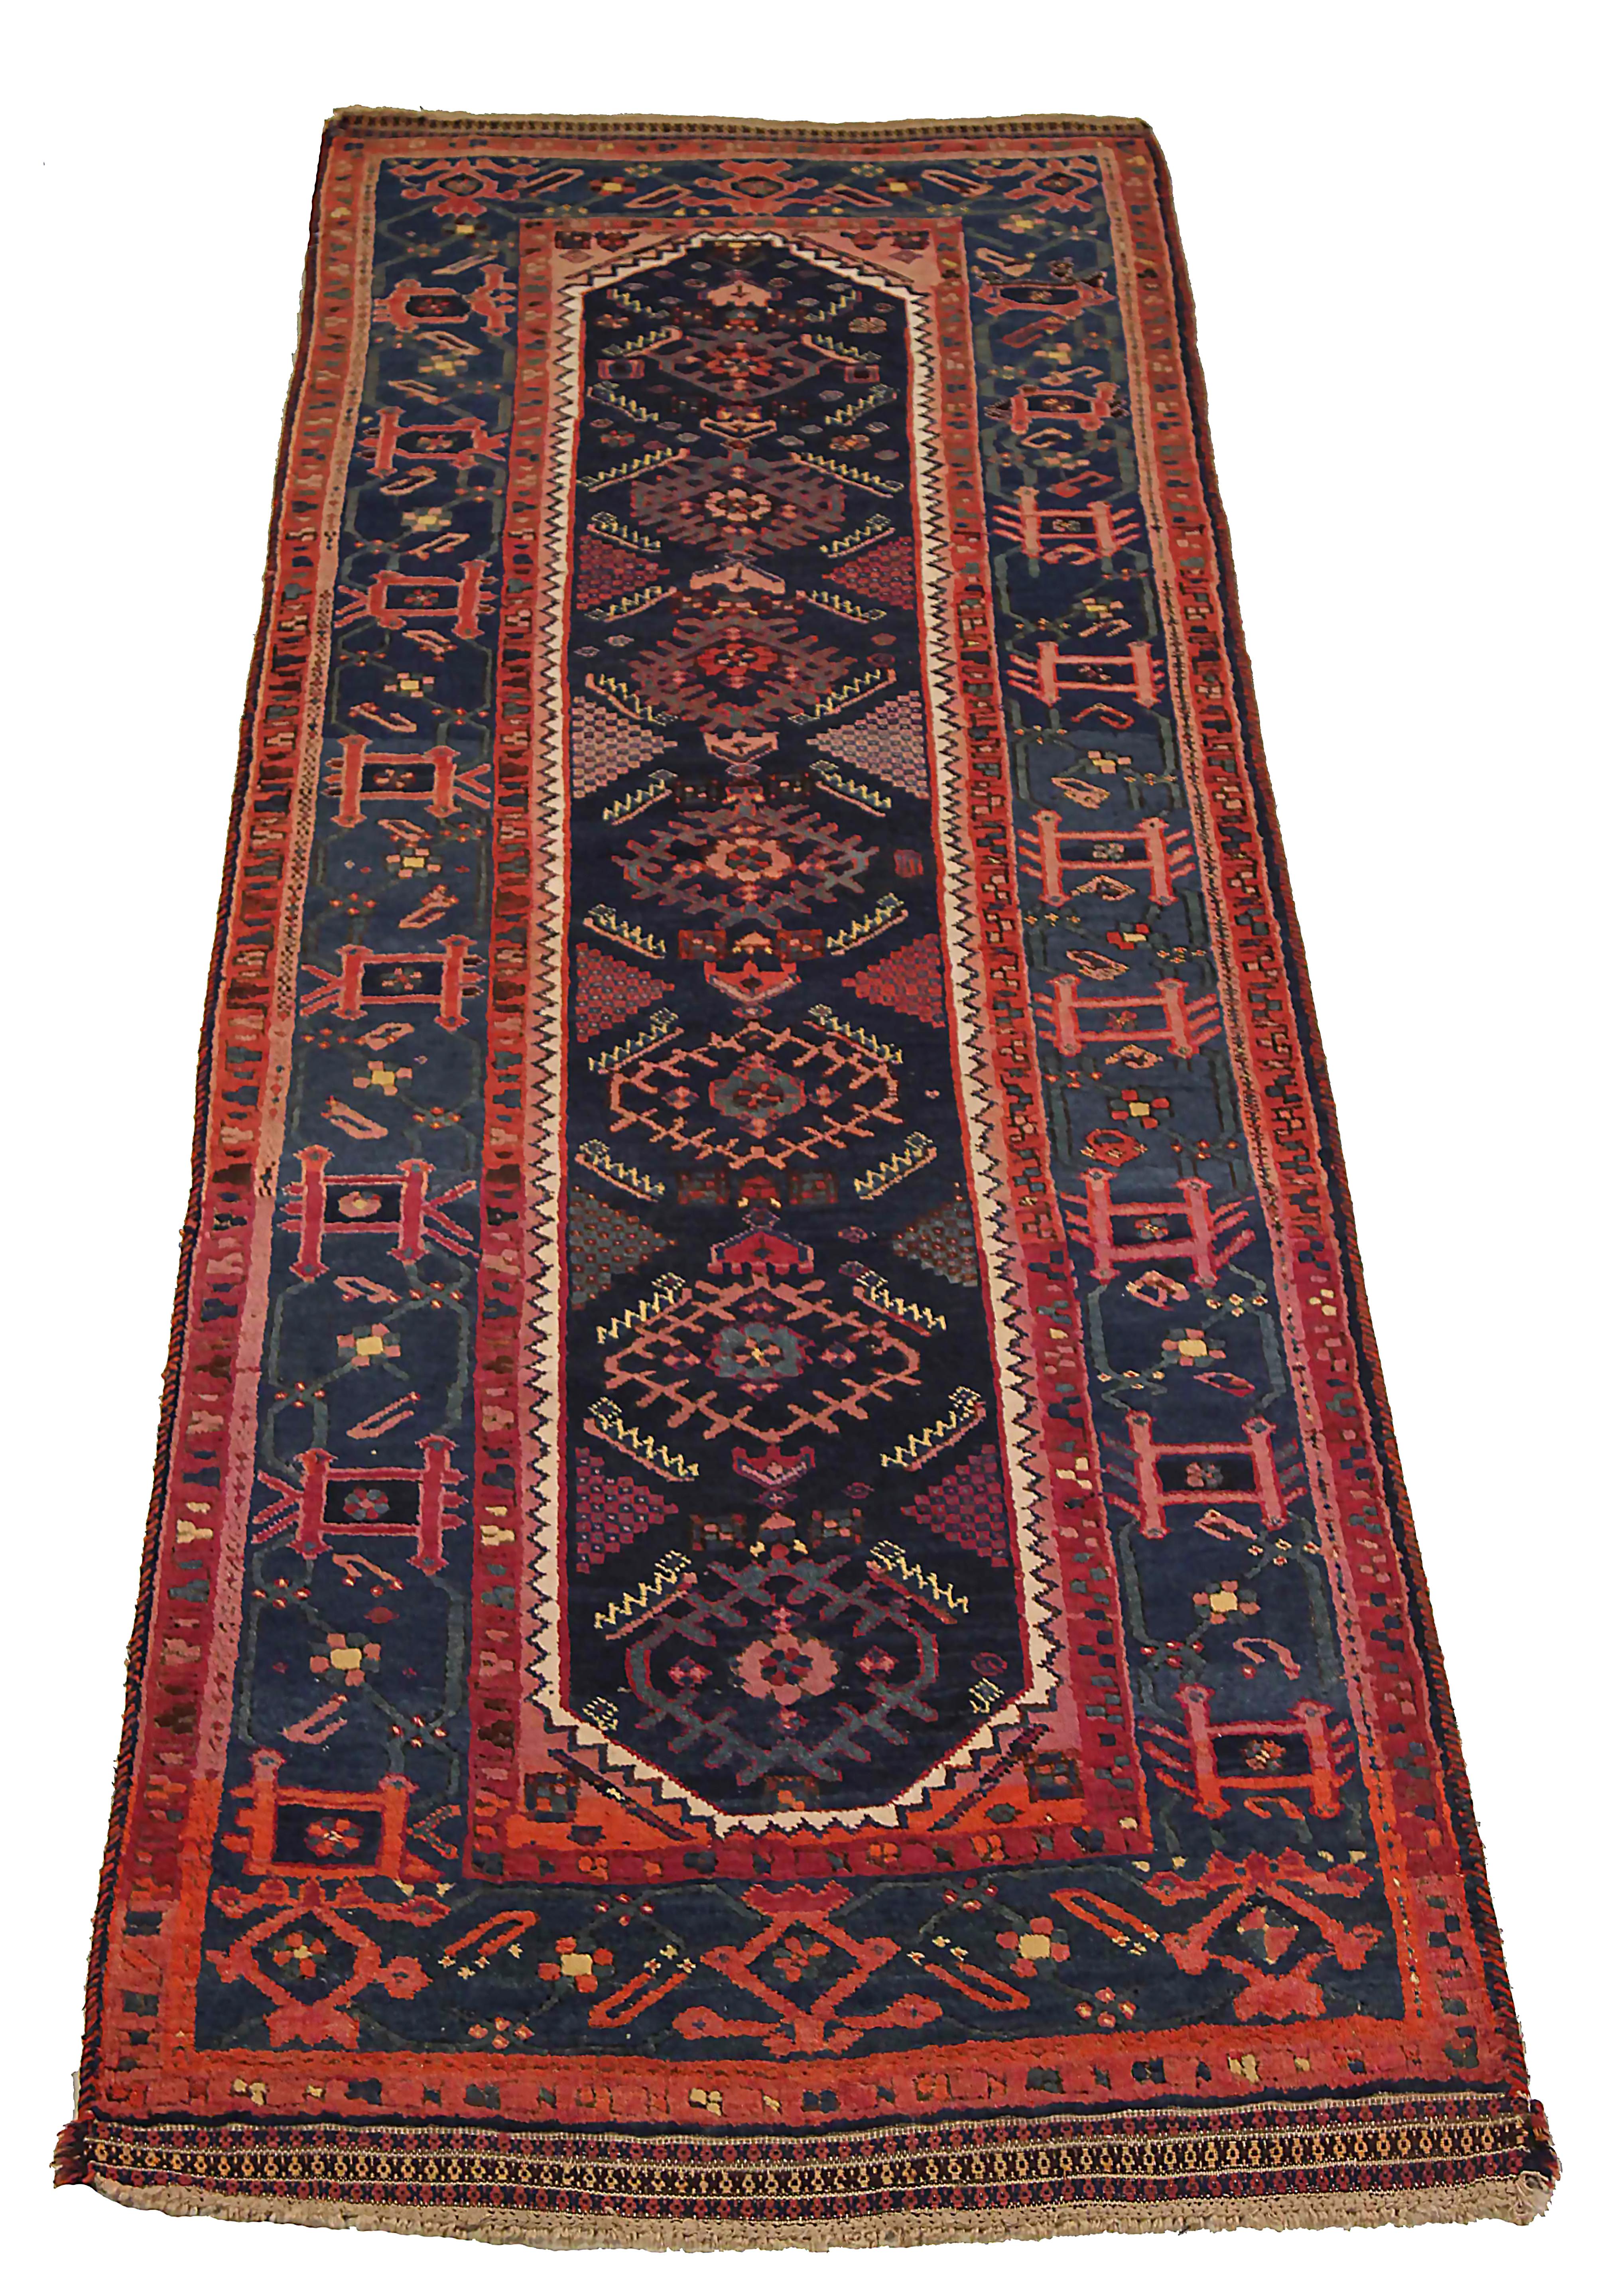 Antique Persian runner rug handwoven from the finest sheep’s wool. It’s colored with all-natural vegetable dyes that are safe for humans and pets. It’s a traditional Shiraz design handwoven by expert artisans. It’s a lovely runner rug that can be